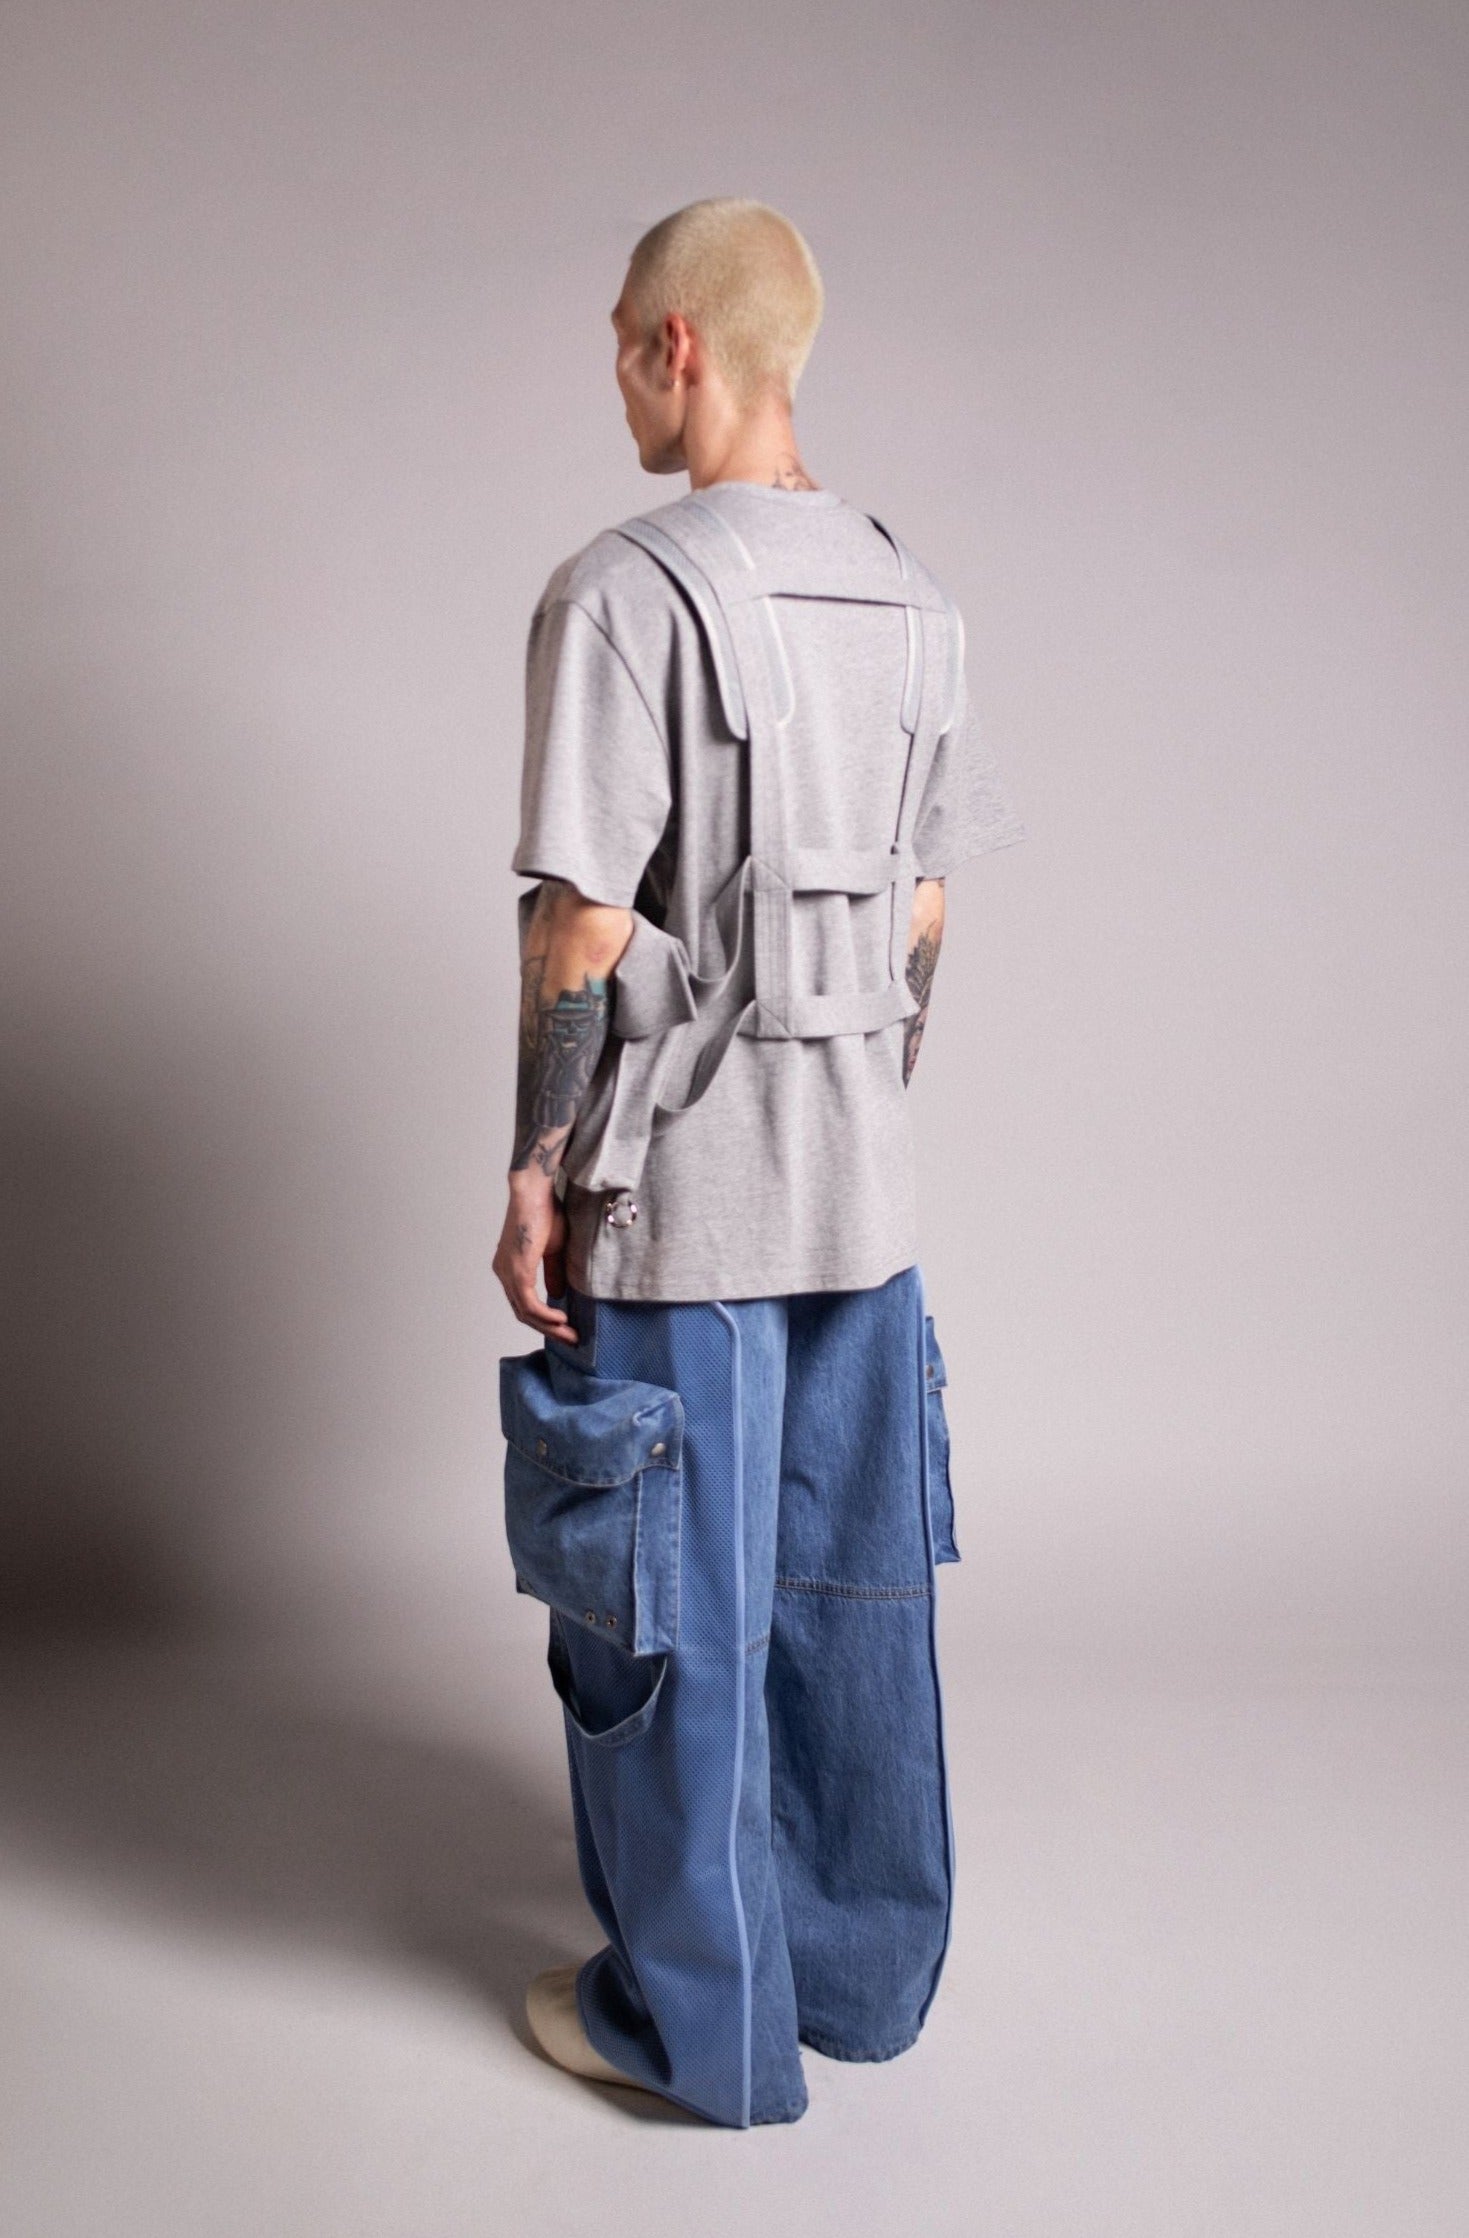 PRIVATE POLICY - Mesh Denim Cargo Pants at DOORS NYC